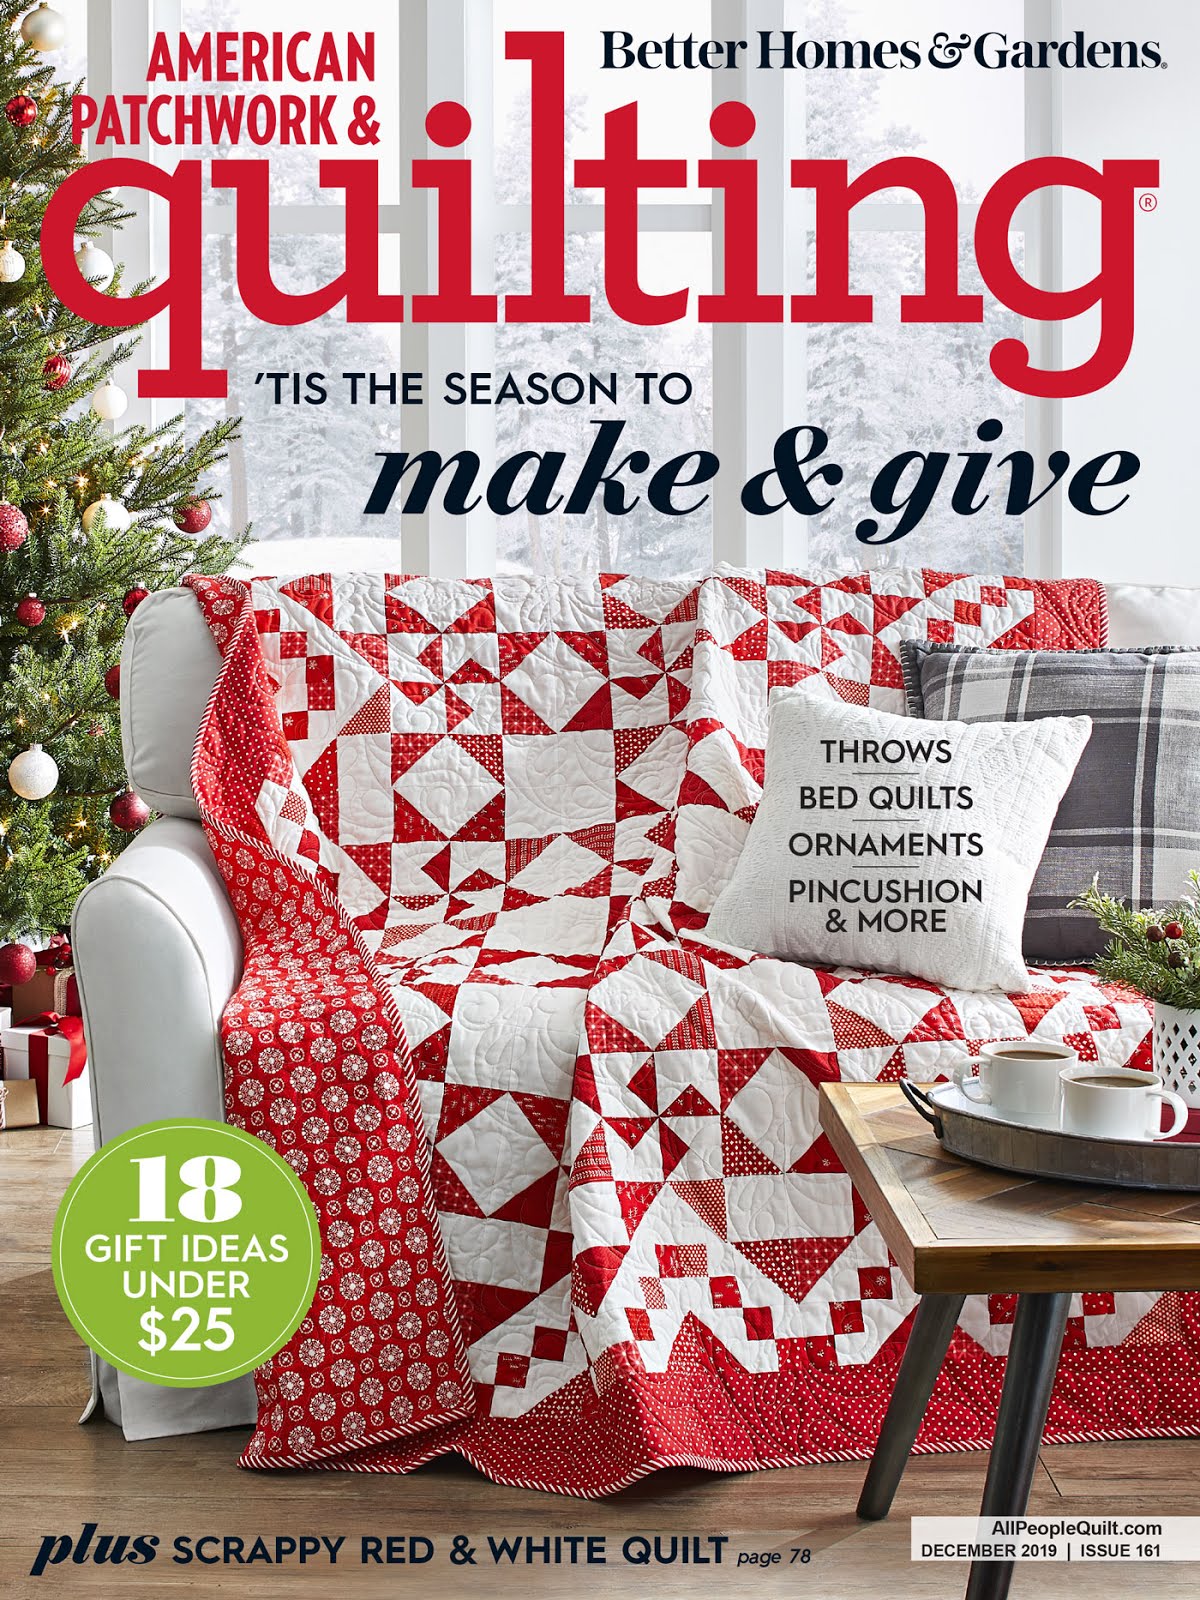 american-patchwork-quilting-december-2019-issue